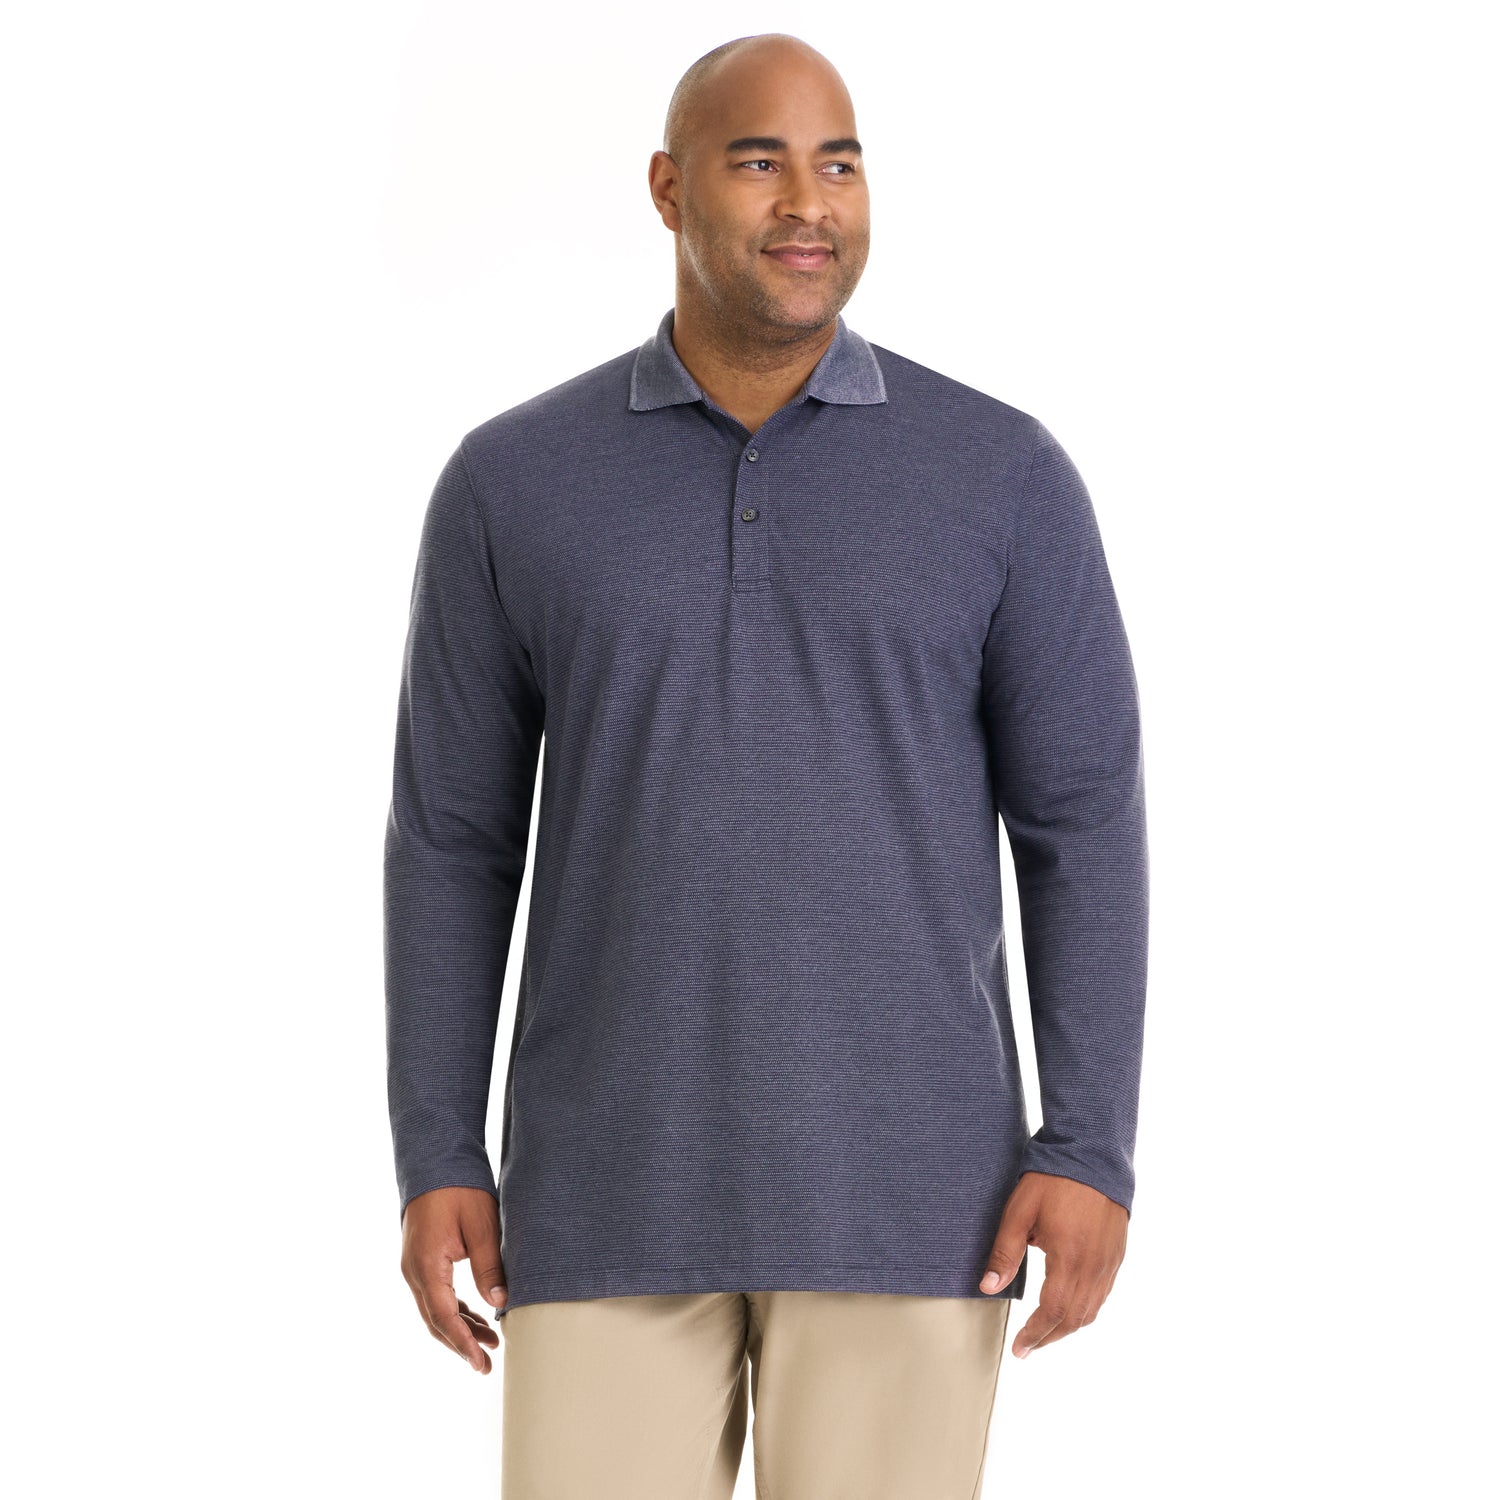 Essential Birdseye Stripe Stain Shield Long Sleeve Polo – Big and Tall